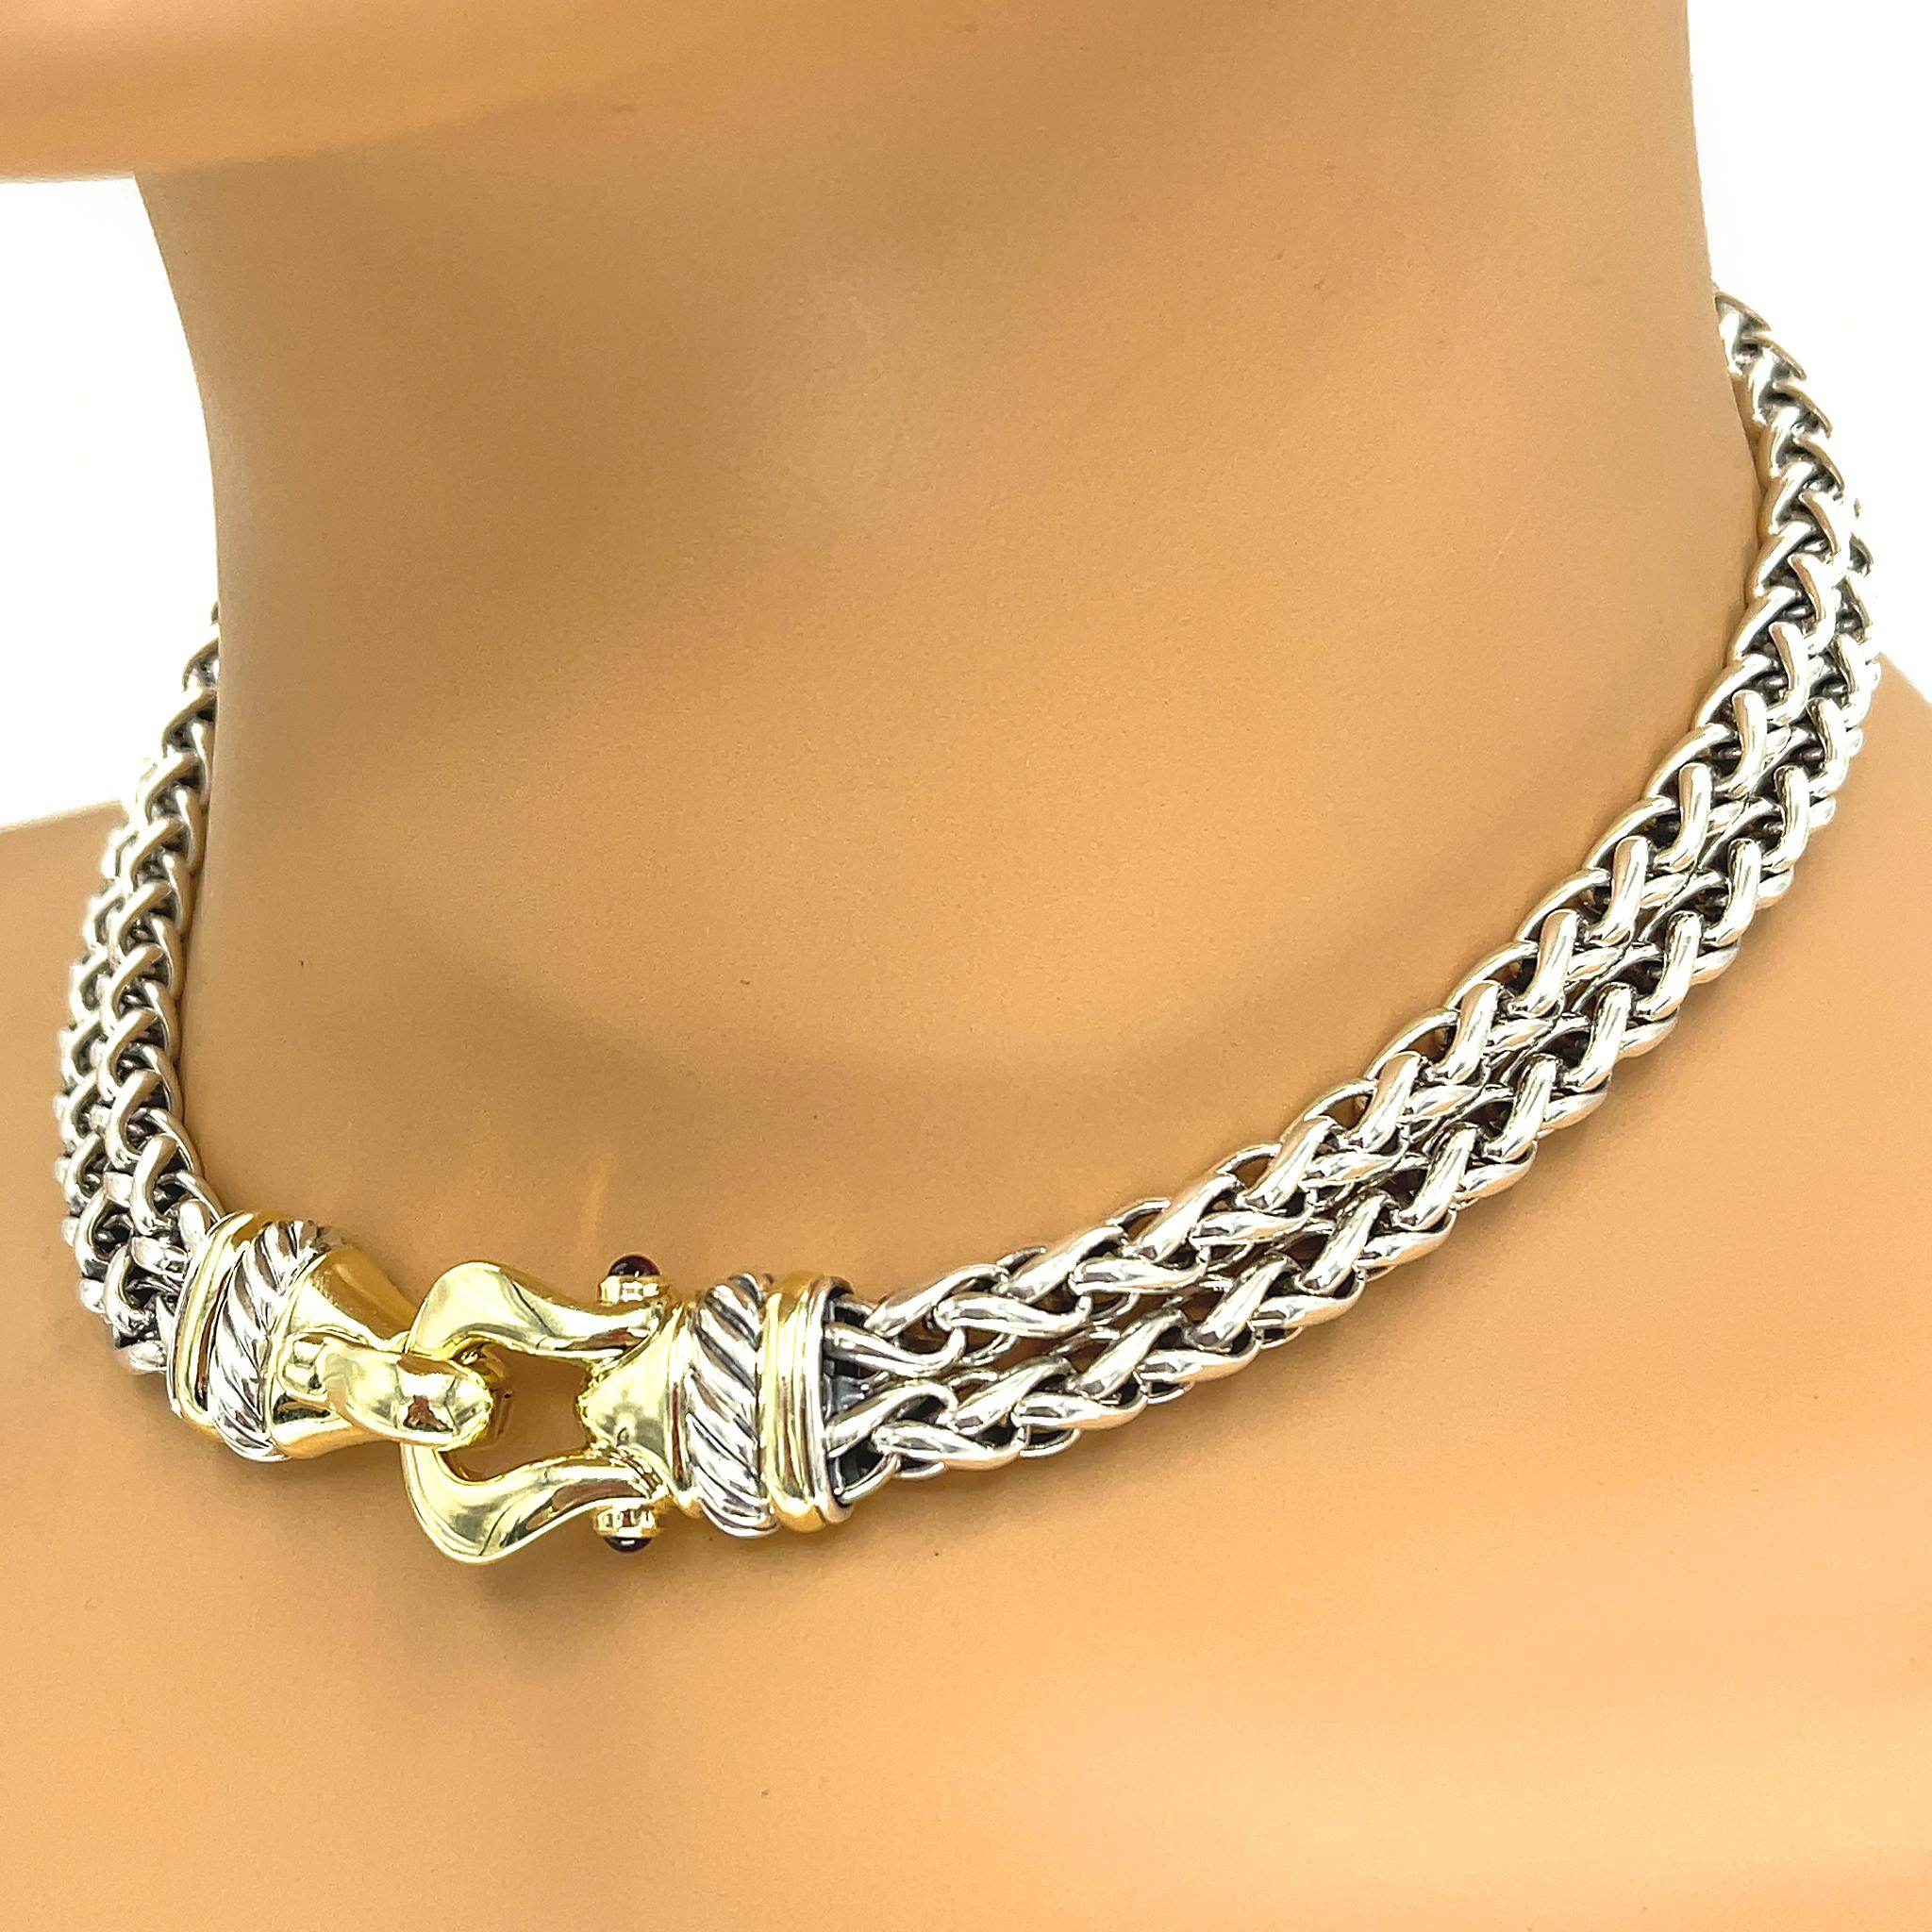 Sterling Silver and 14K Yellow Gold
Length: 16 inches
Chain Width: 6 mm
Pristine Condition